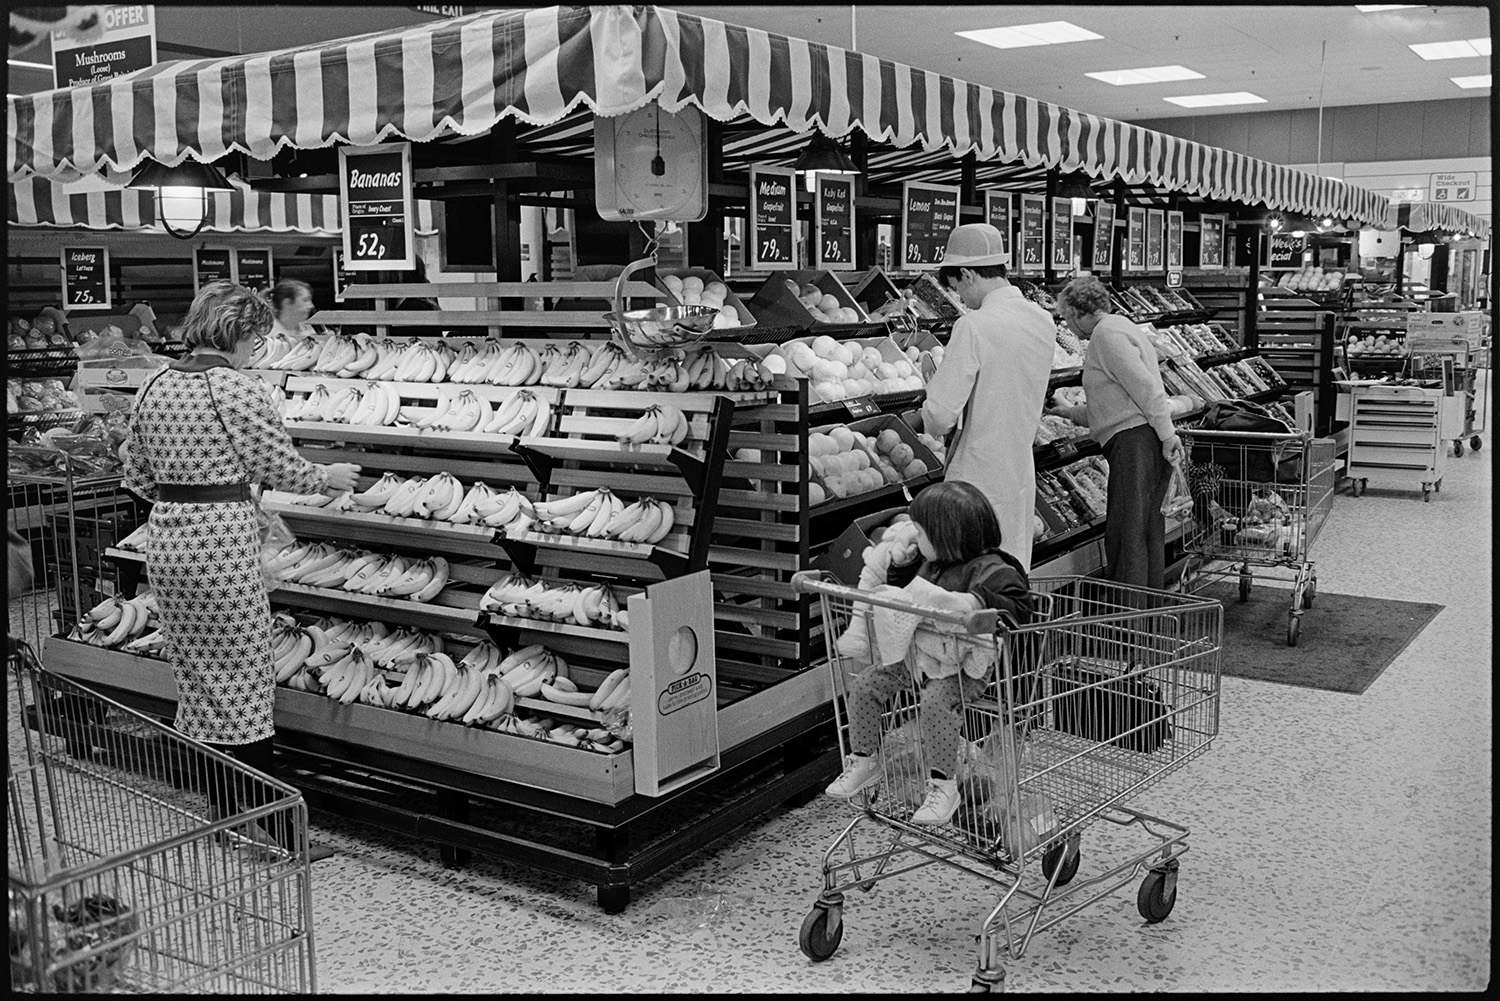 Interior of supermarket with people shopping, delivery lorry being unloaded. 
[People shopping in the Tesco supermarket in Barnstaple. A woman is selecting bananas from shelves under a striped awning while a child sits in a trolley nearby. A staff members is checking fruit further along the aisle.]